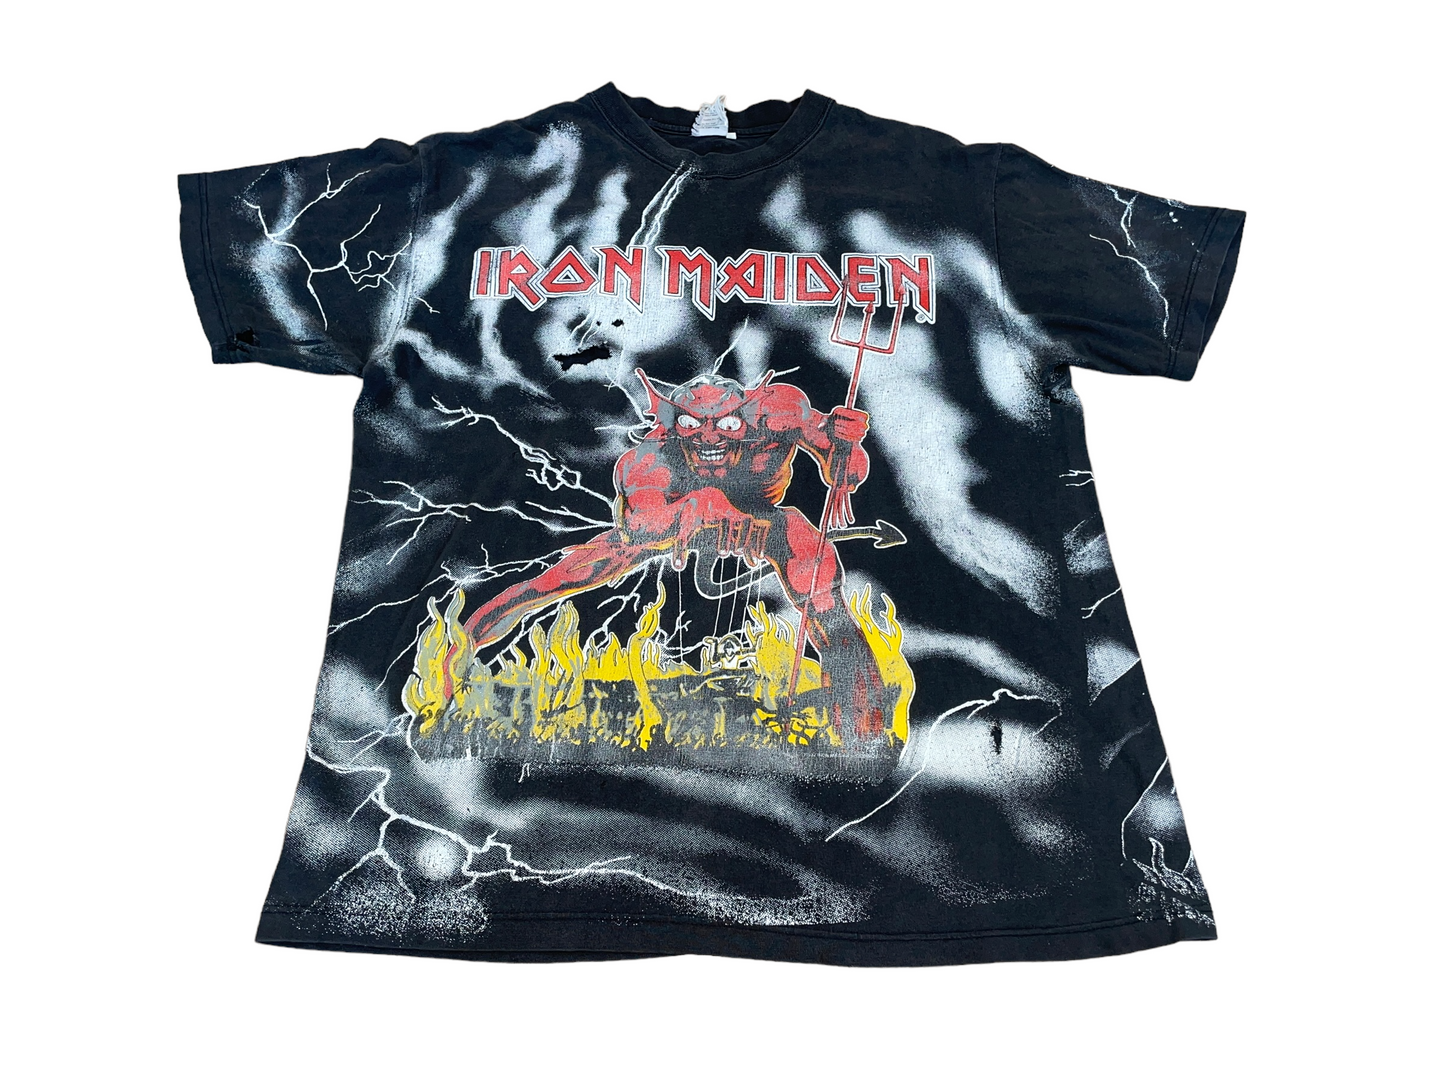 Vintage 1992 Iron Maiden All Over Print T-Shirt